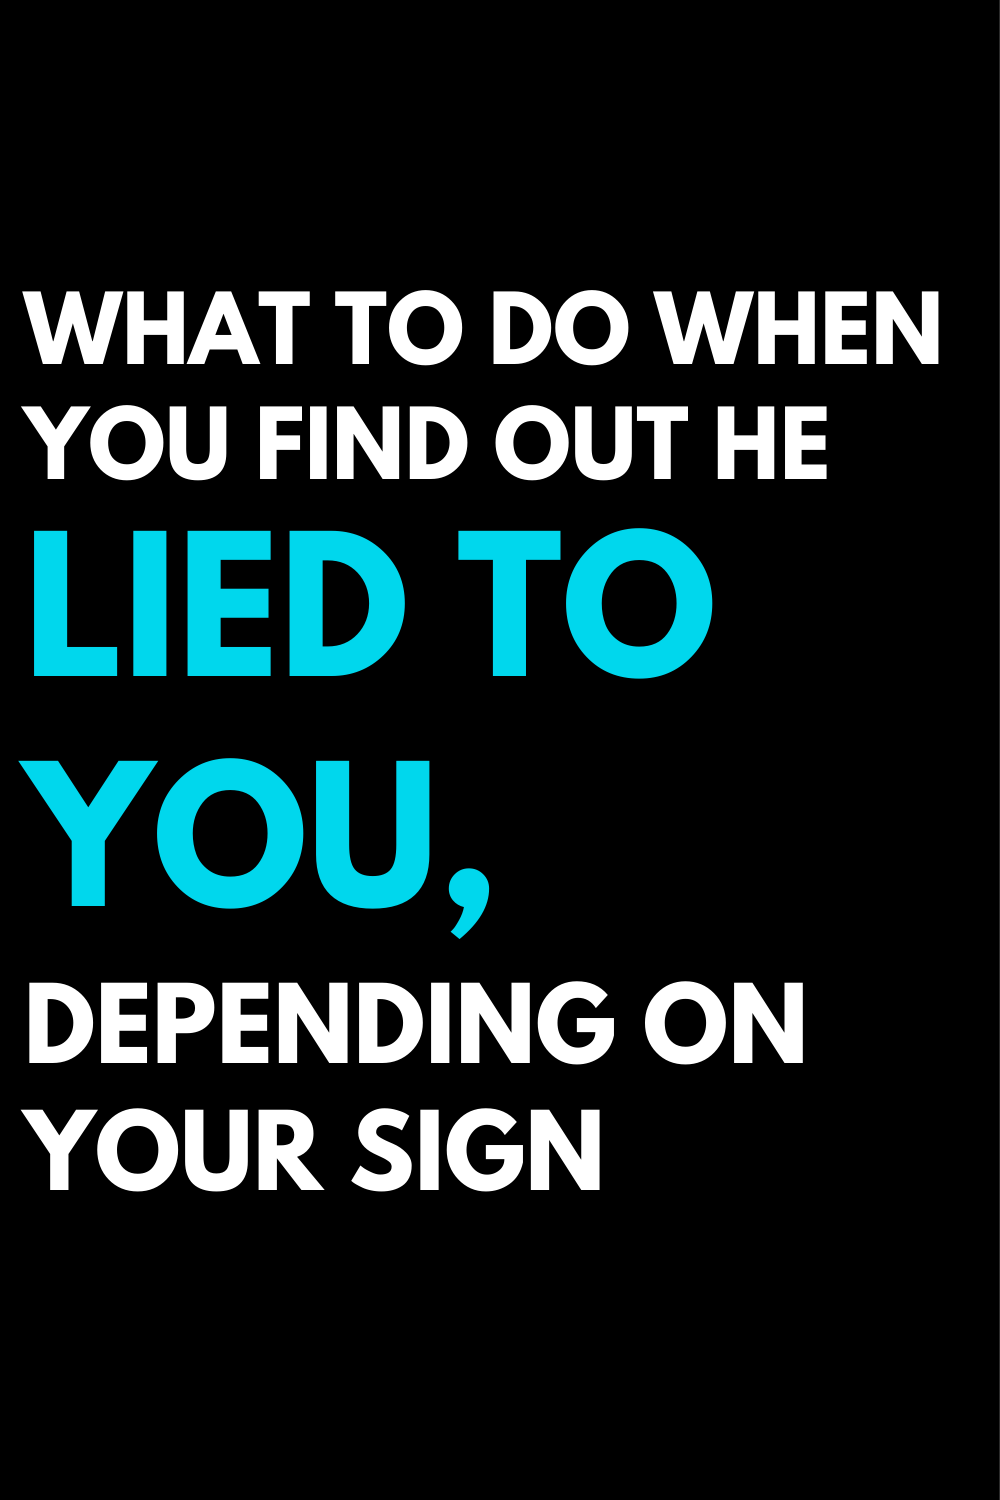 What to do when you find out he lied to you, depending on your sign